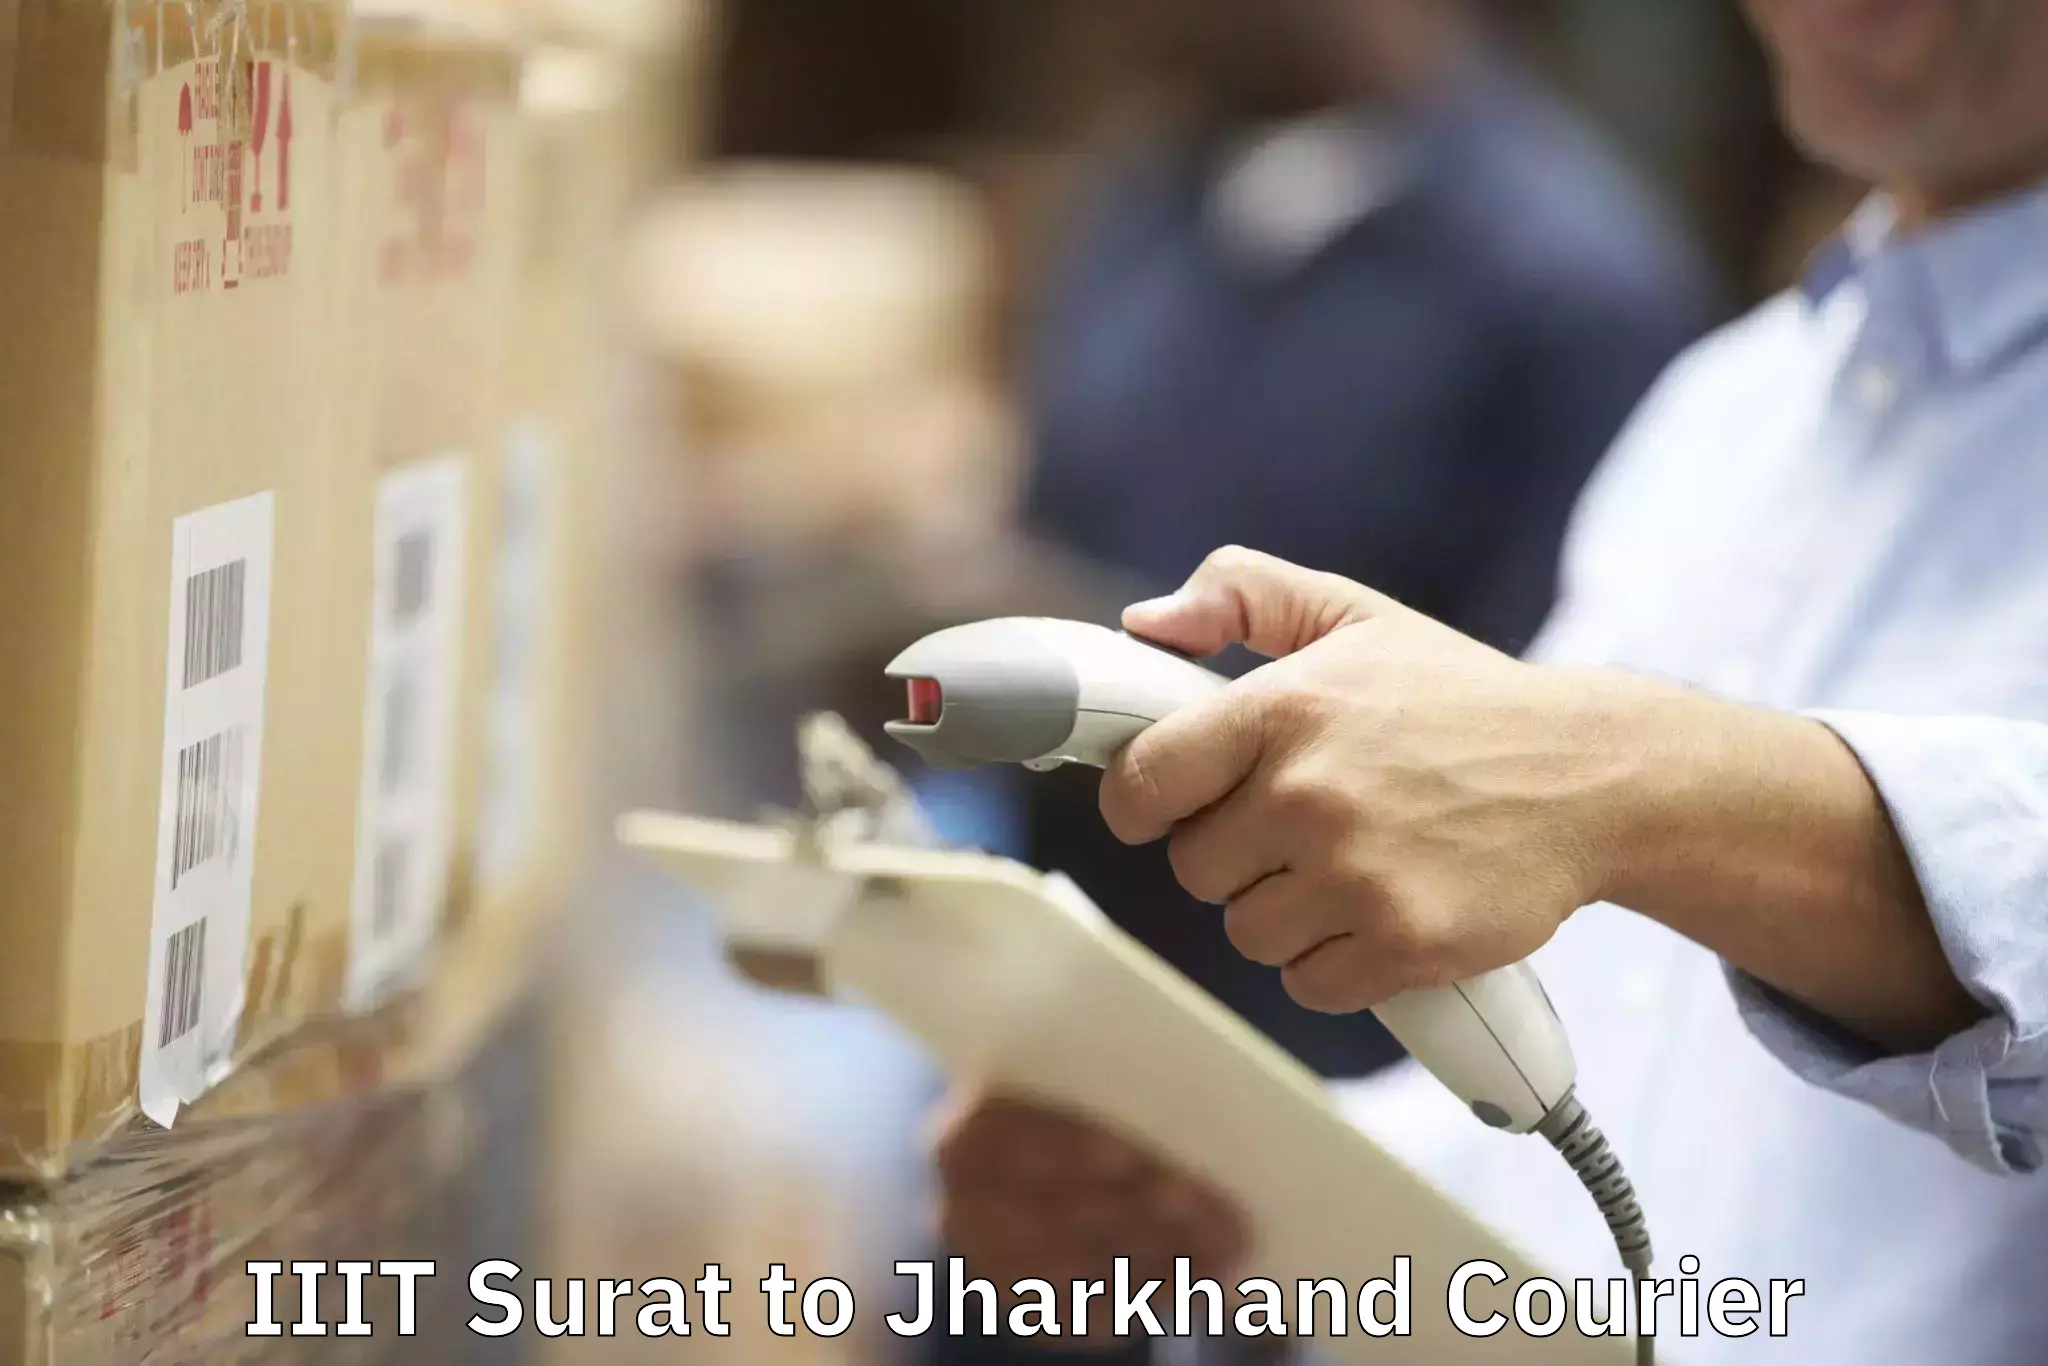 Trusted relocation services IIIT Surat to Dhanbad